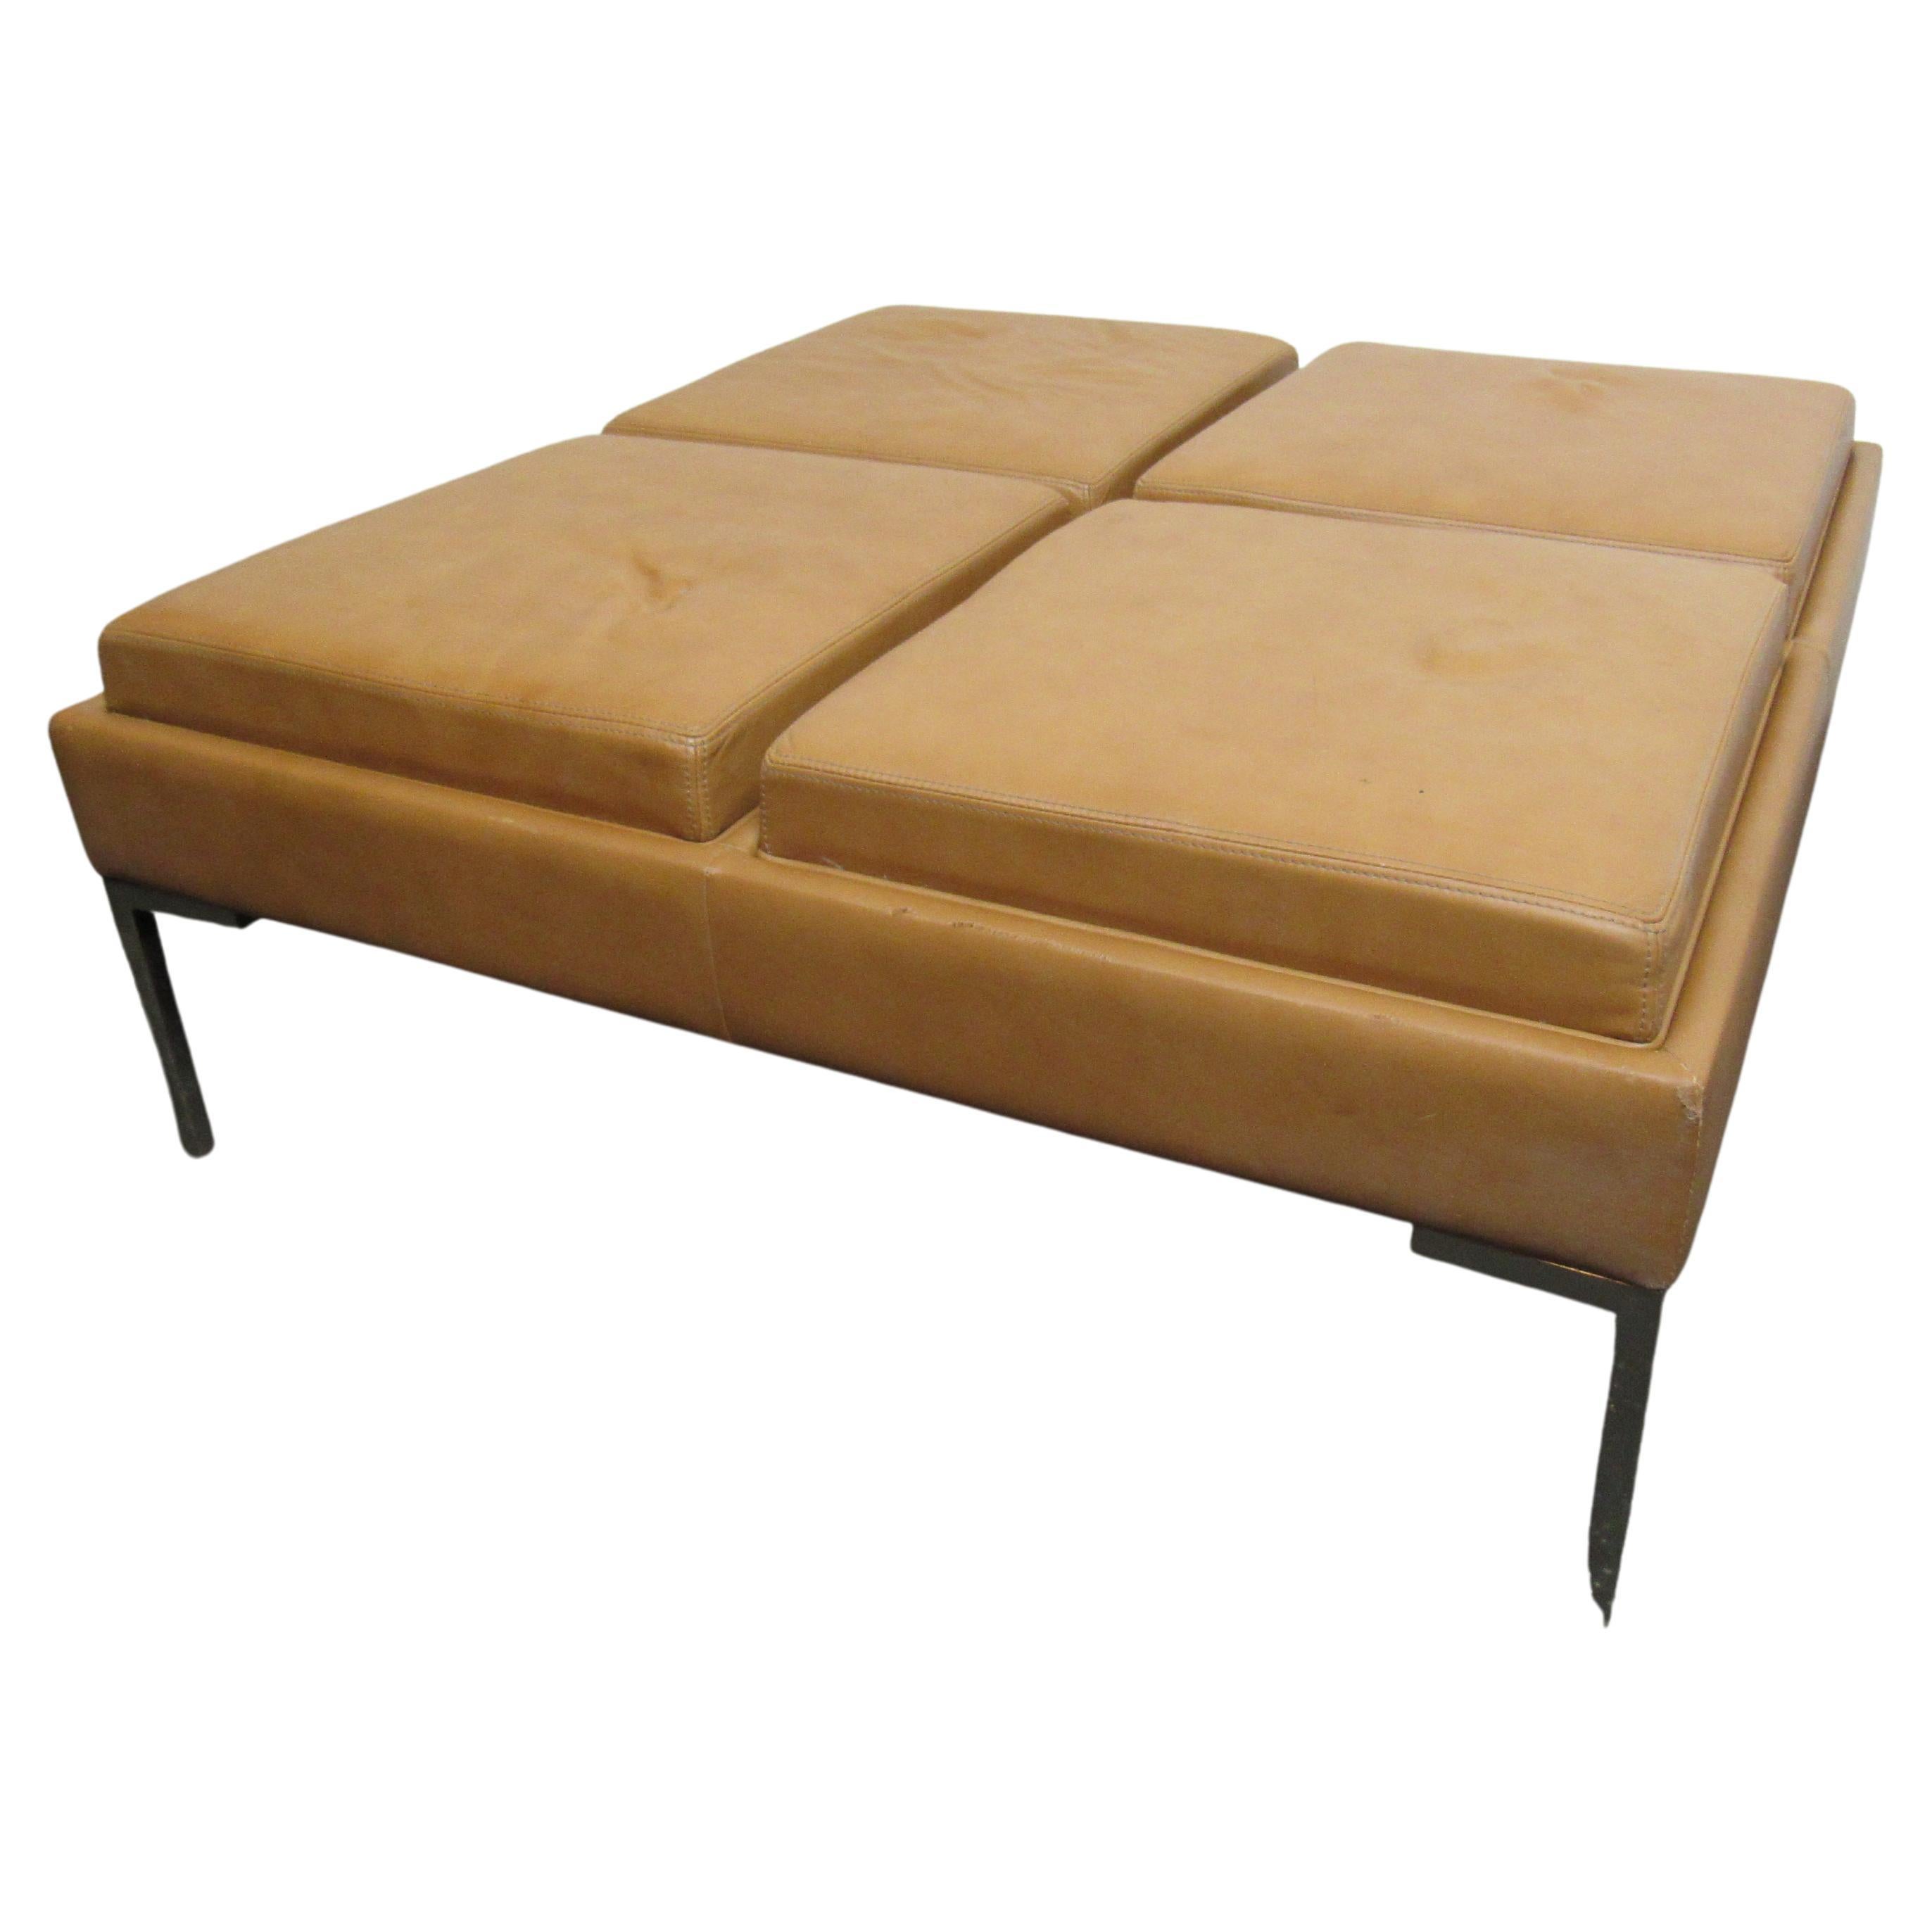 Square Leather Ottoman with Cushion Trays 